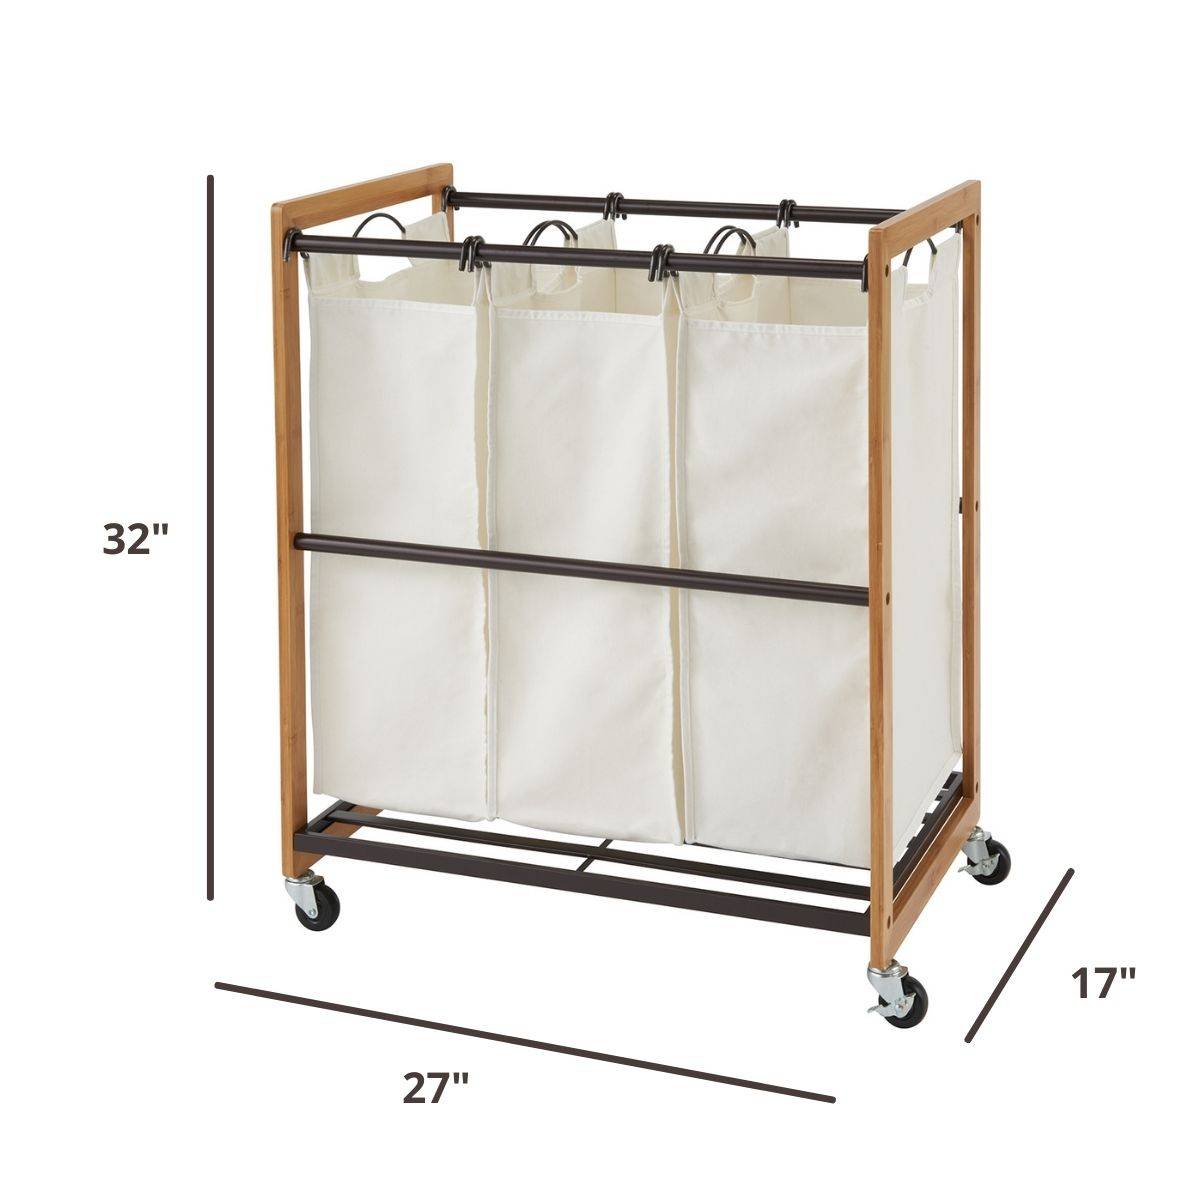 32 inches tall by 27 wide by 17 inches deep laundry organizer